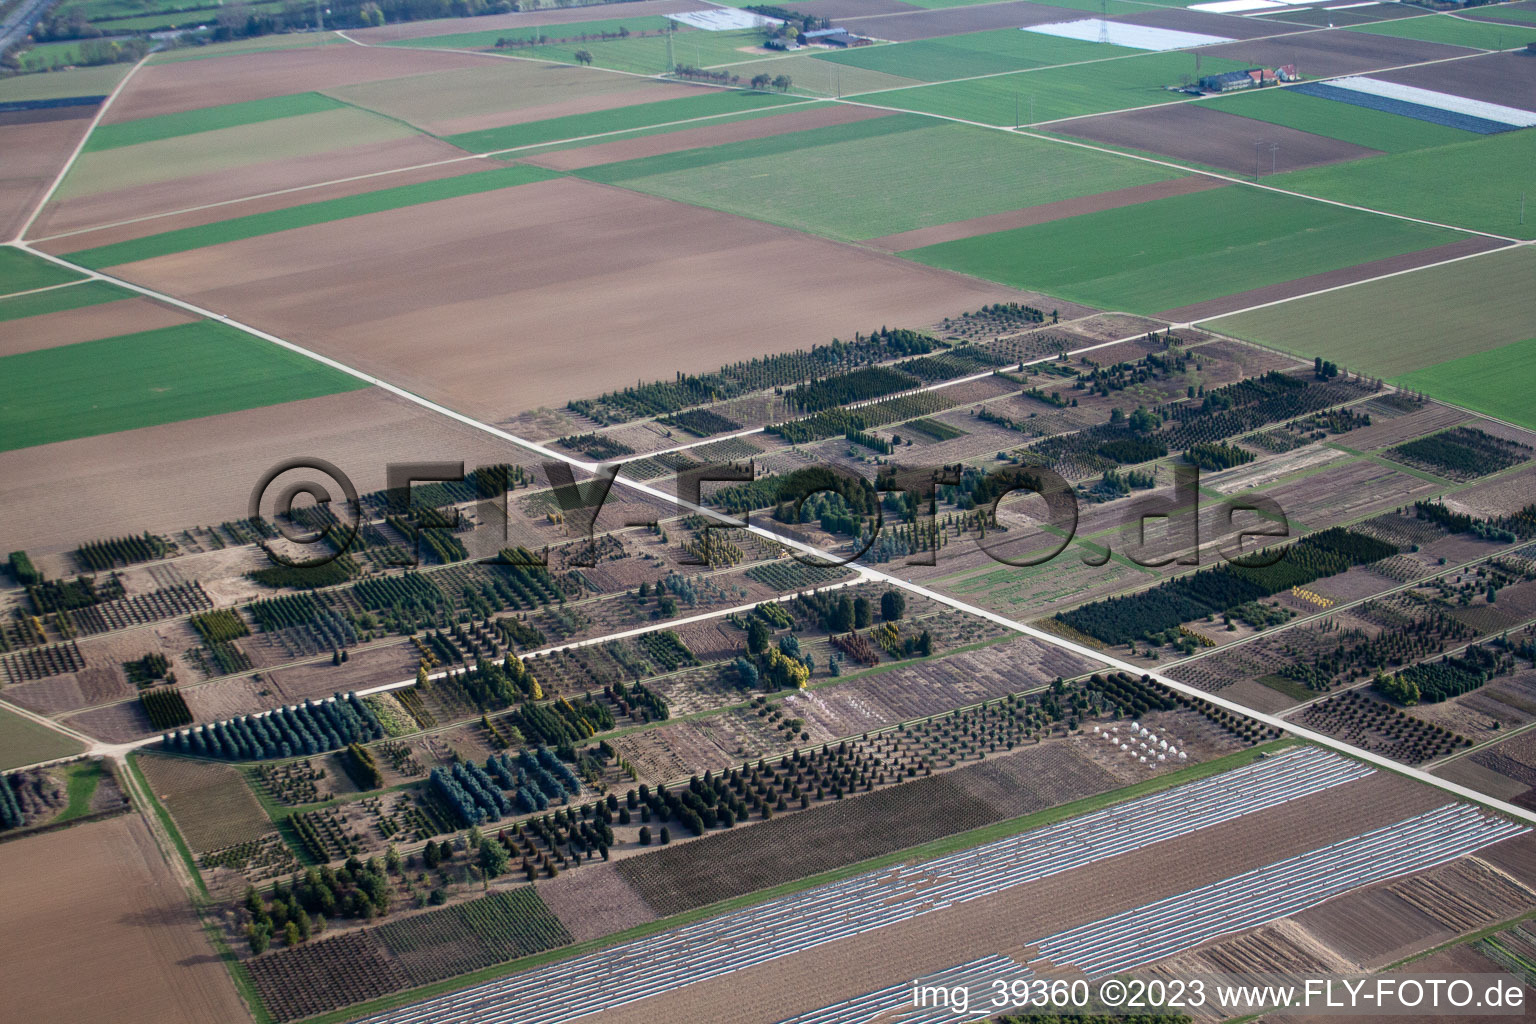 Häussermann perennials + trees, in the cornfield in Möglingen in the state Baden-Wuerttemberg, Germany viewn from the air